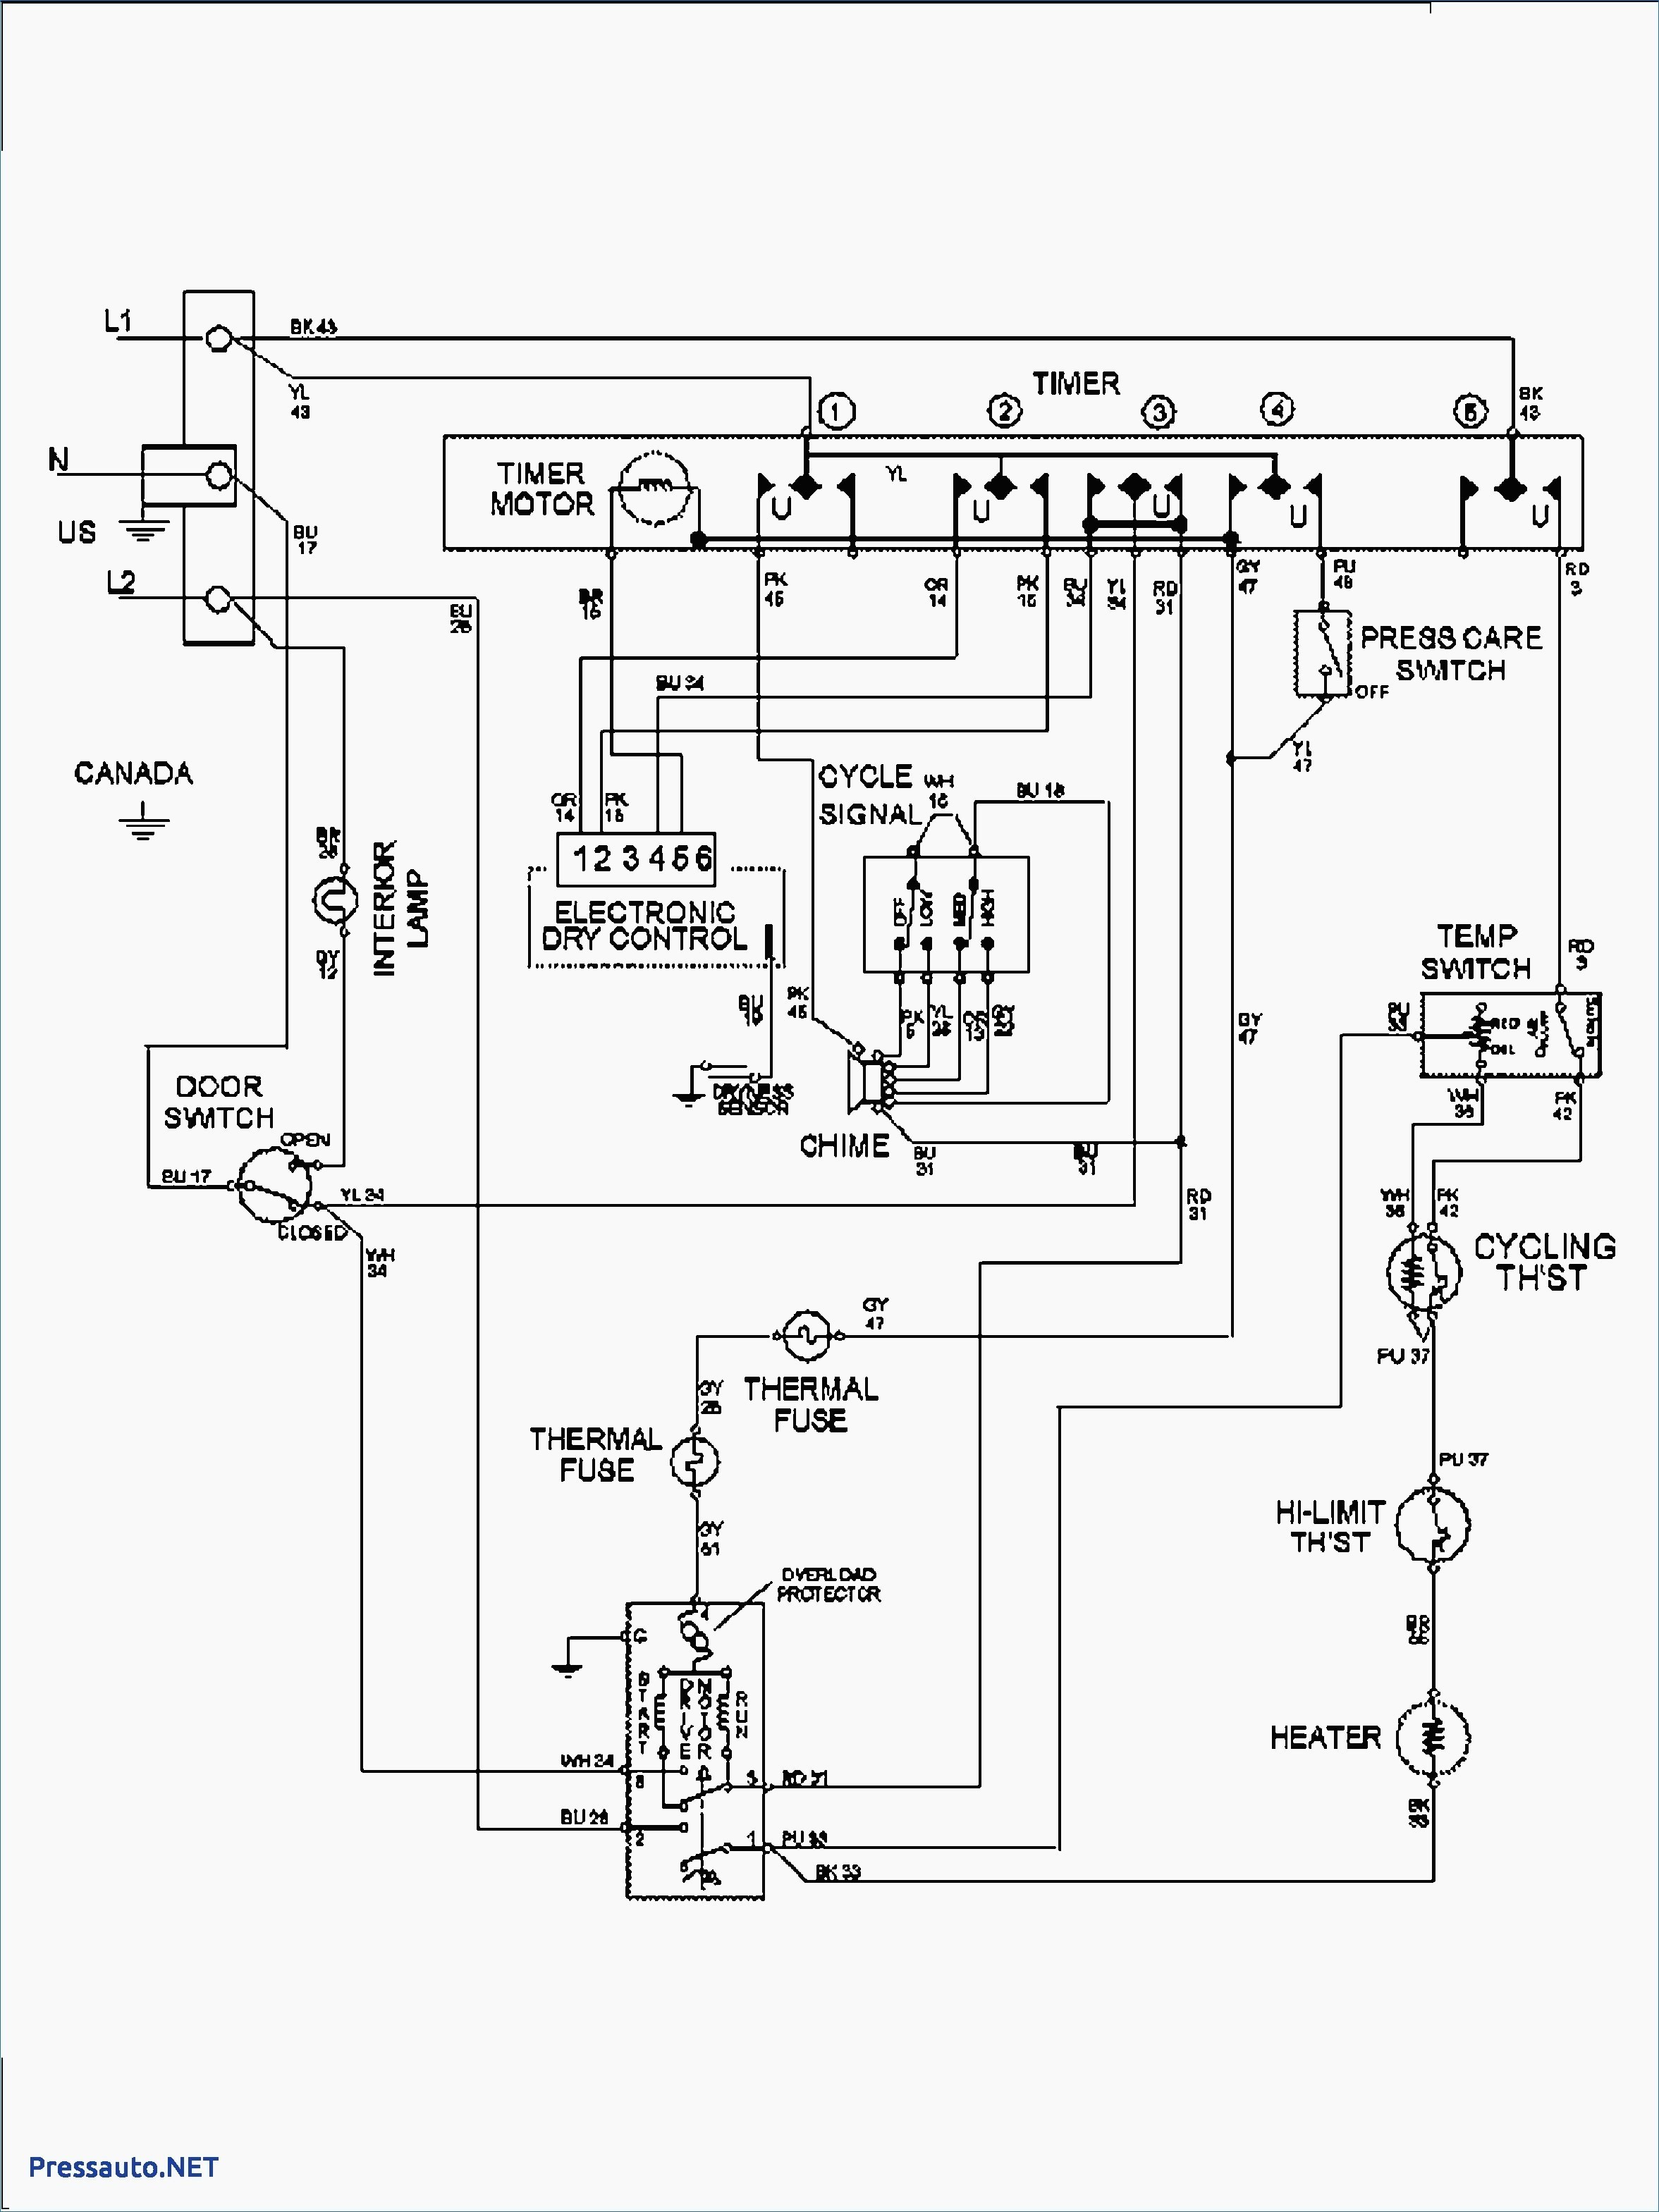 Wiring Diagram for Ge Electric Dryer Fresh Wiring Diagram for A Ge Dryer Fresh Wiring Diagram